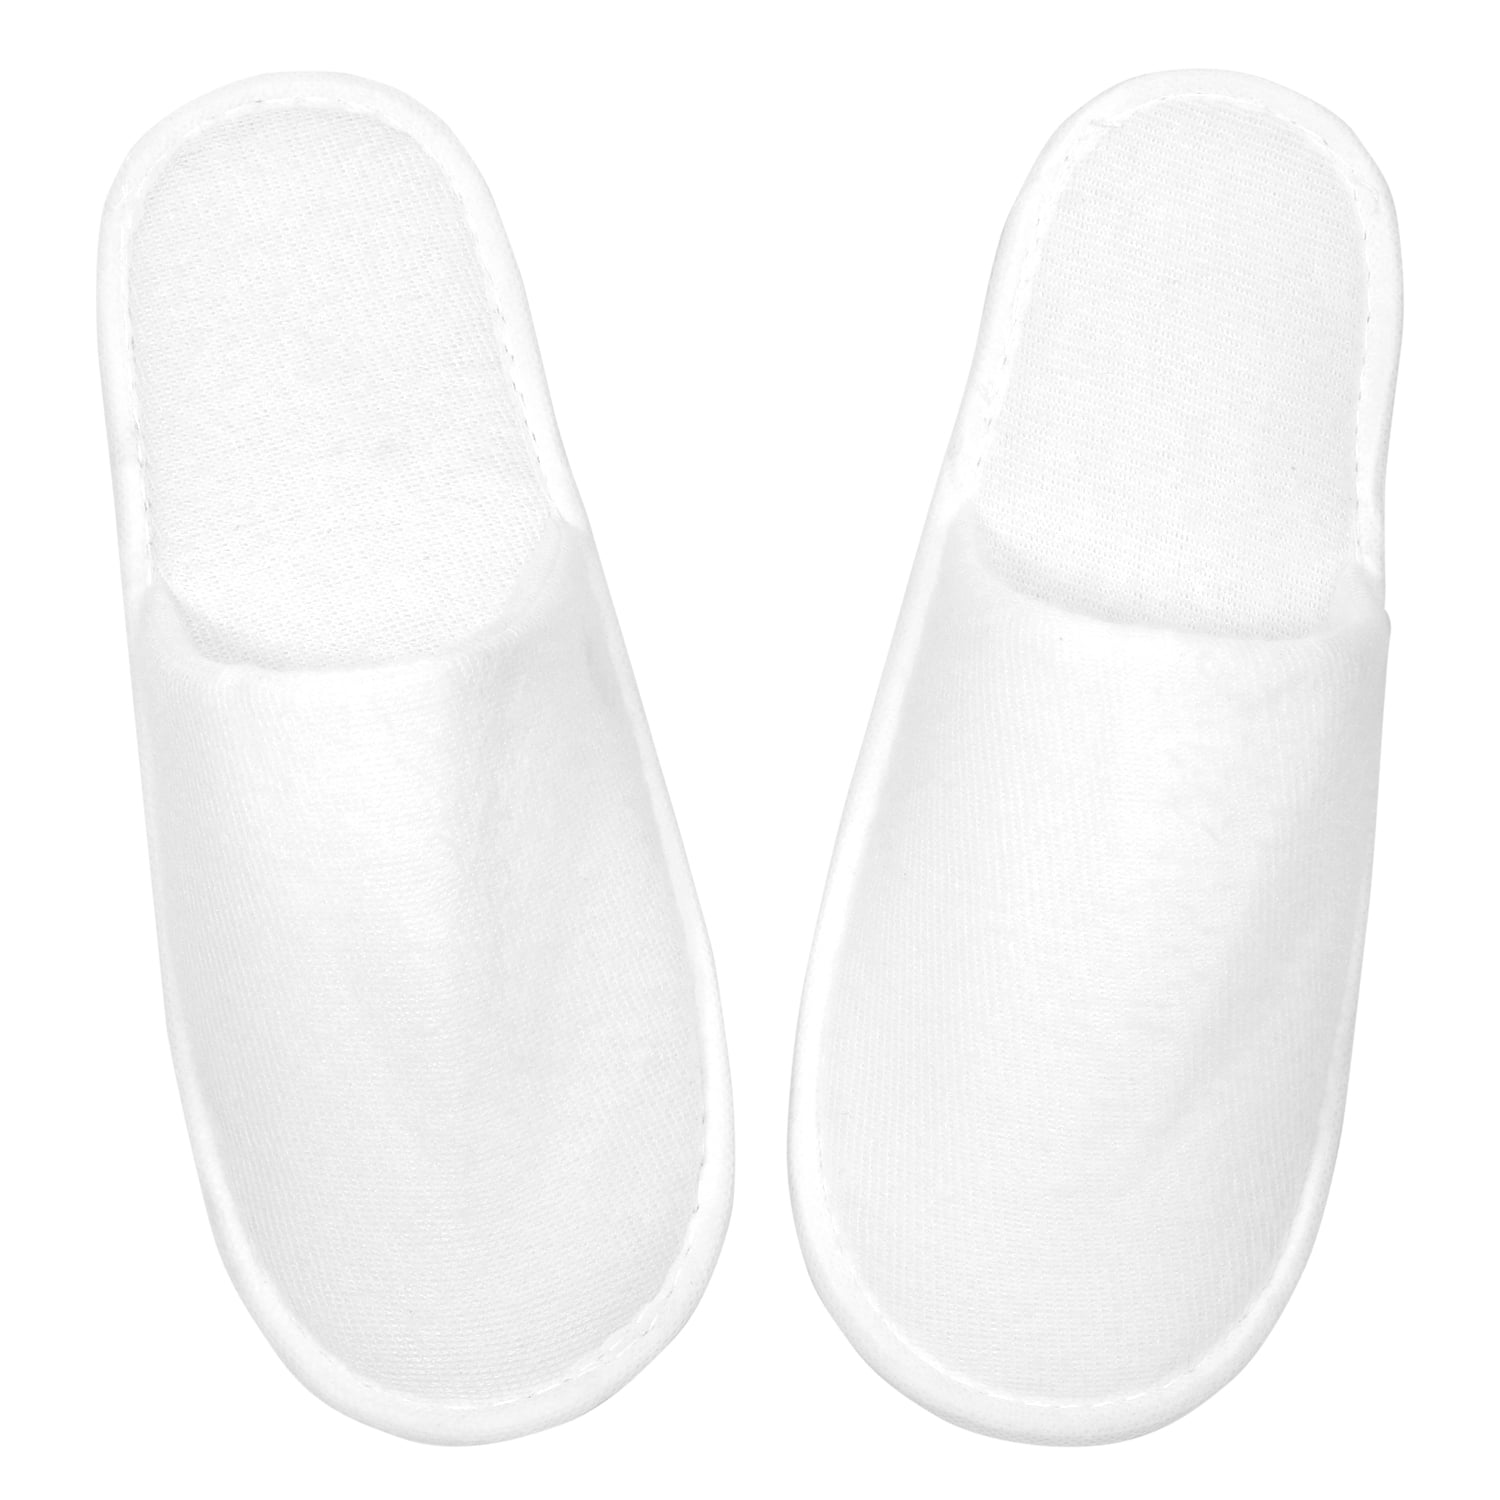 grey Medium Cotton Mackur Disposable Slippers Cotton Hotel Slippers Closed Universal Size for Hotel Travel 5 Pairs 